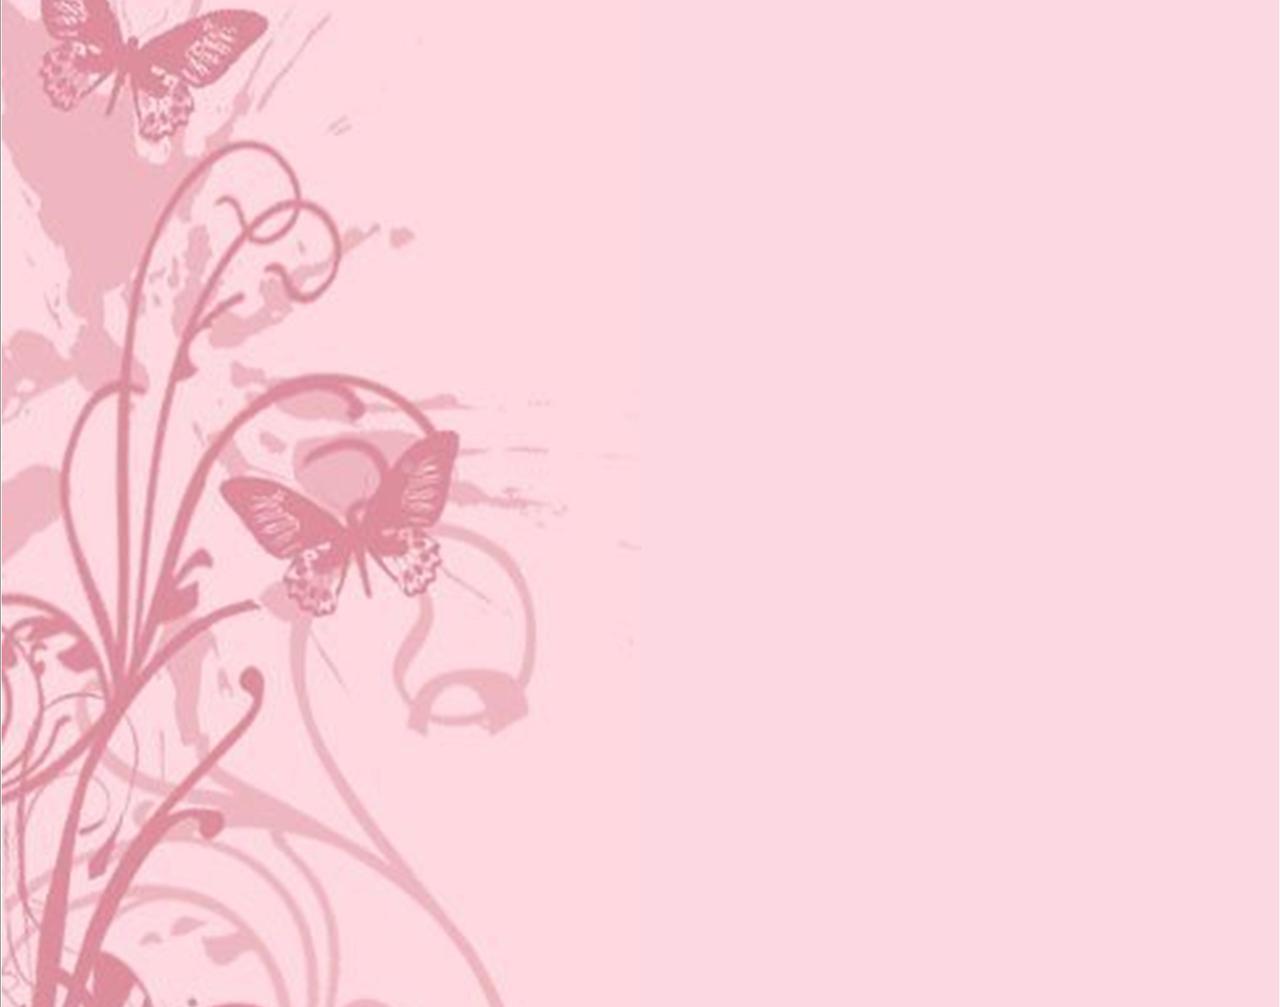 Butterfly Background 3v68nk6 Kb Picserio